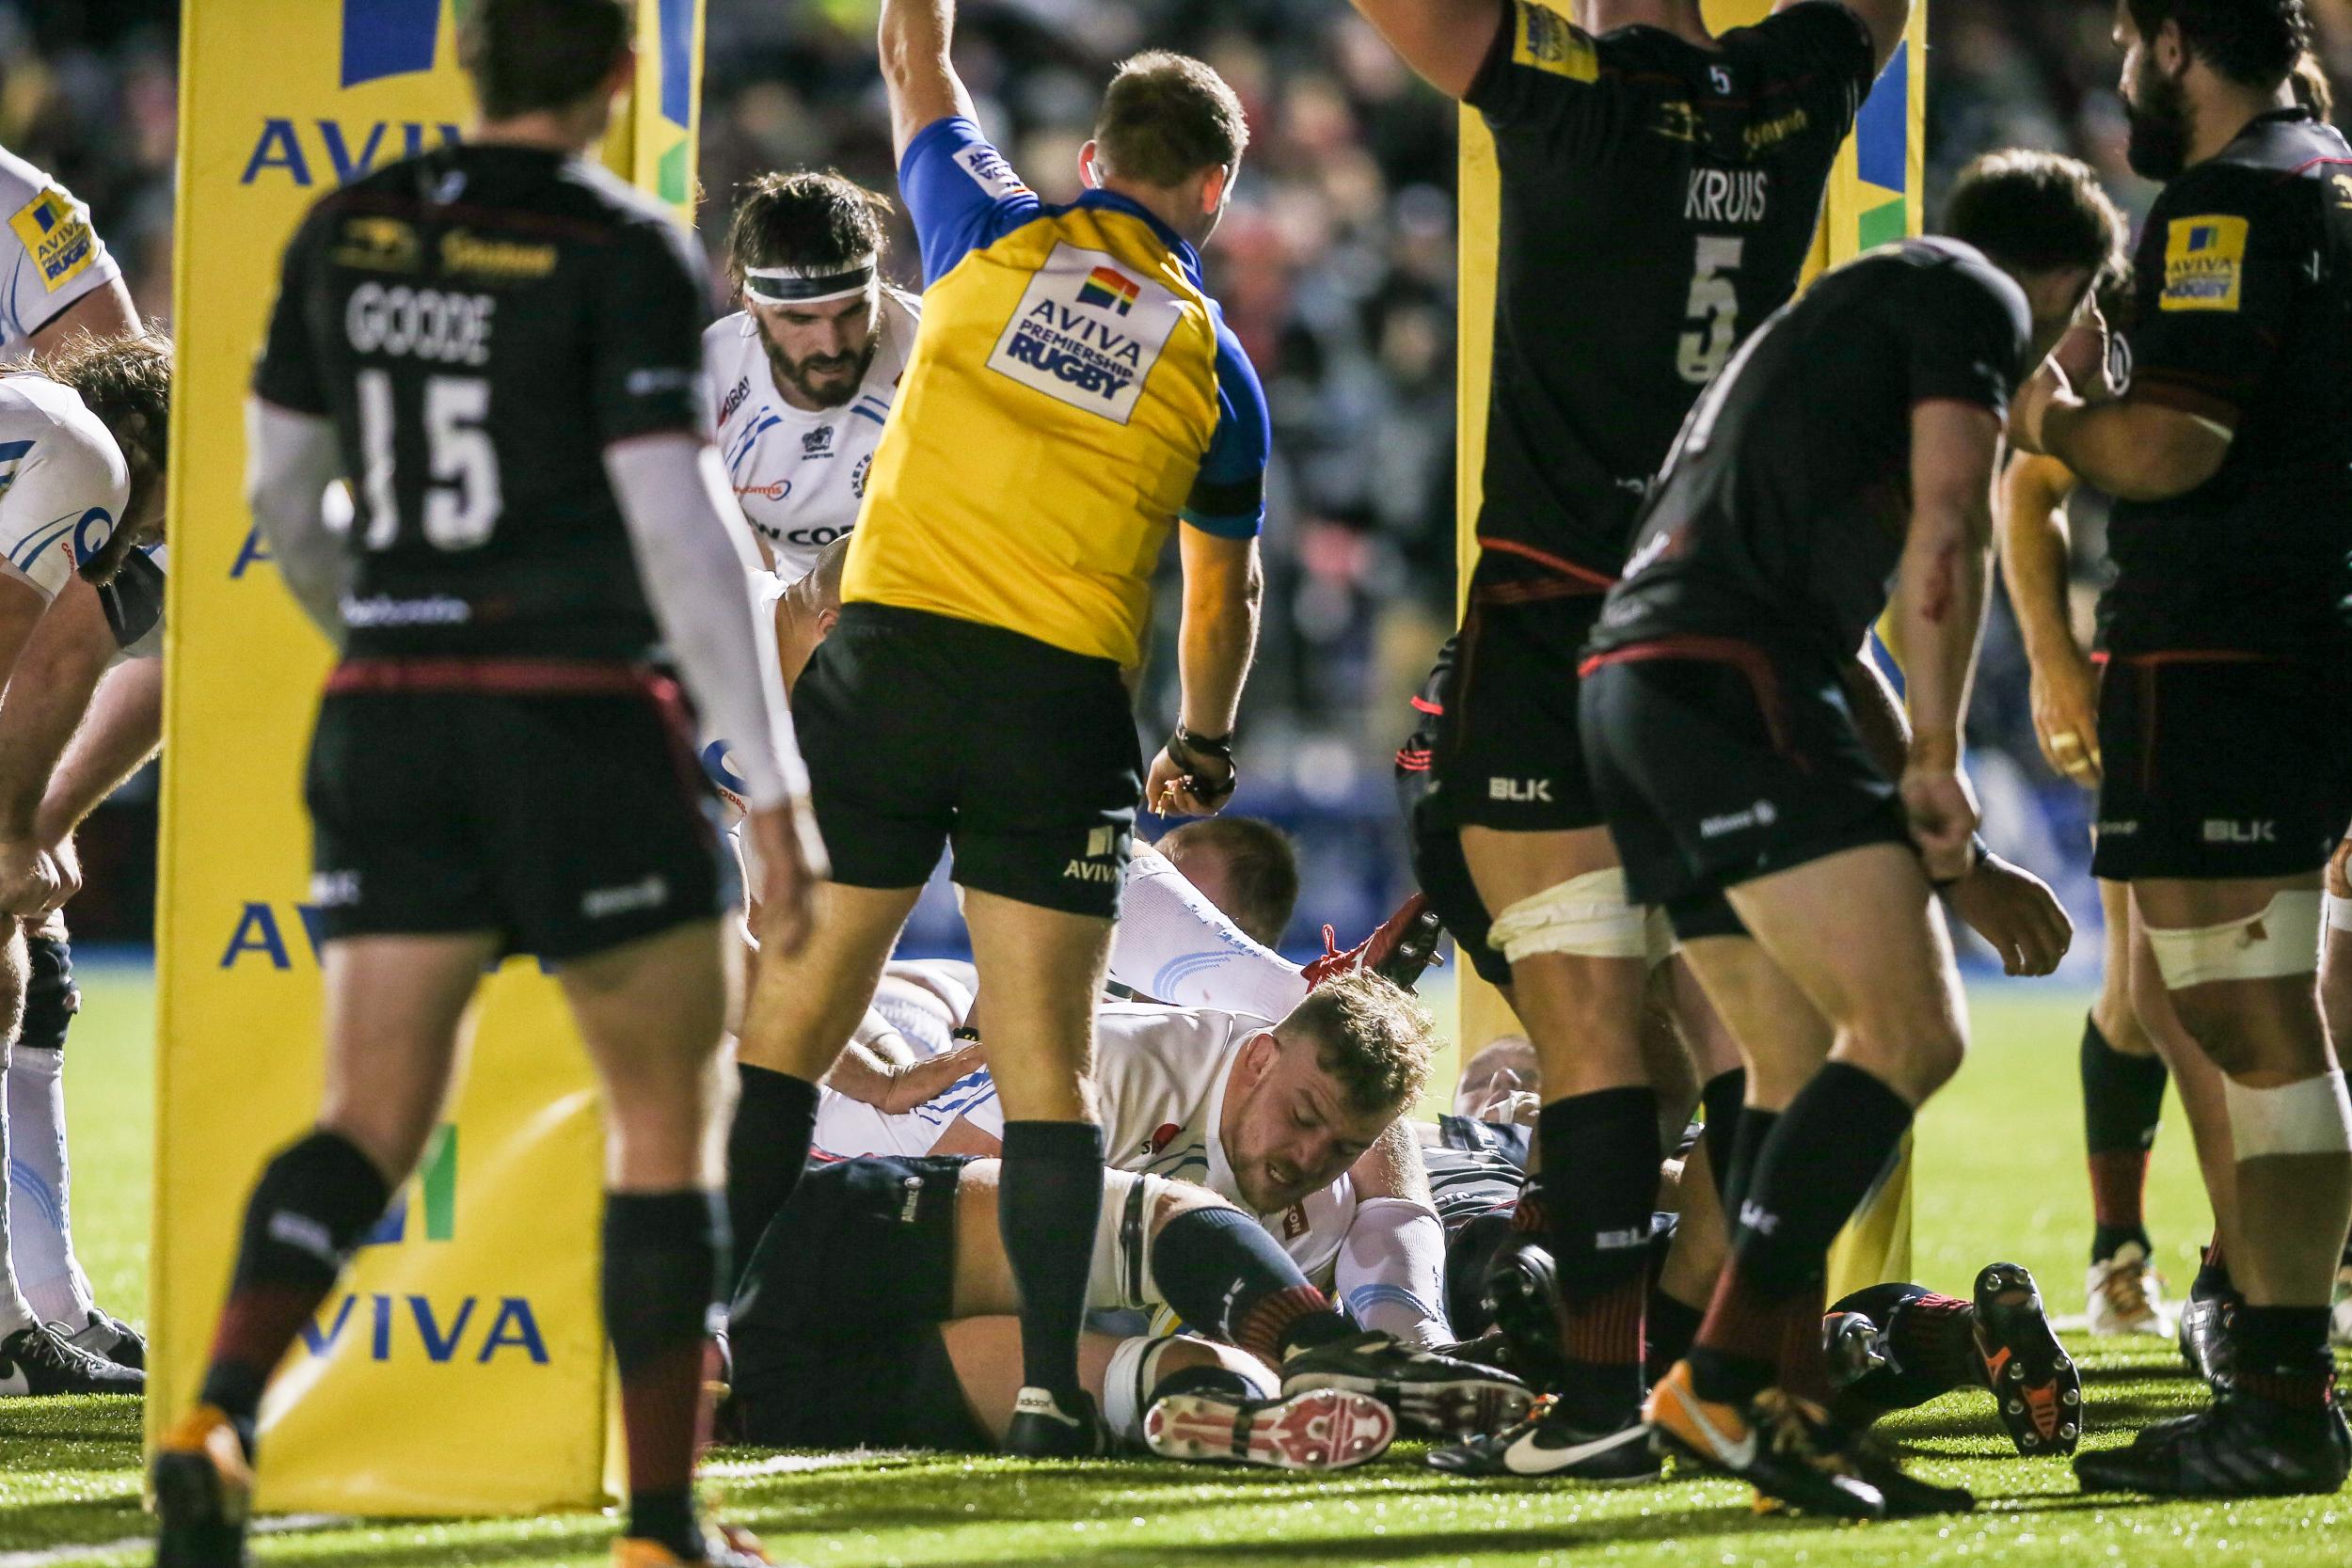 Exeter Chiefs' Moray Low scores the winning try